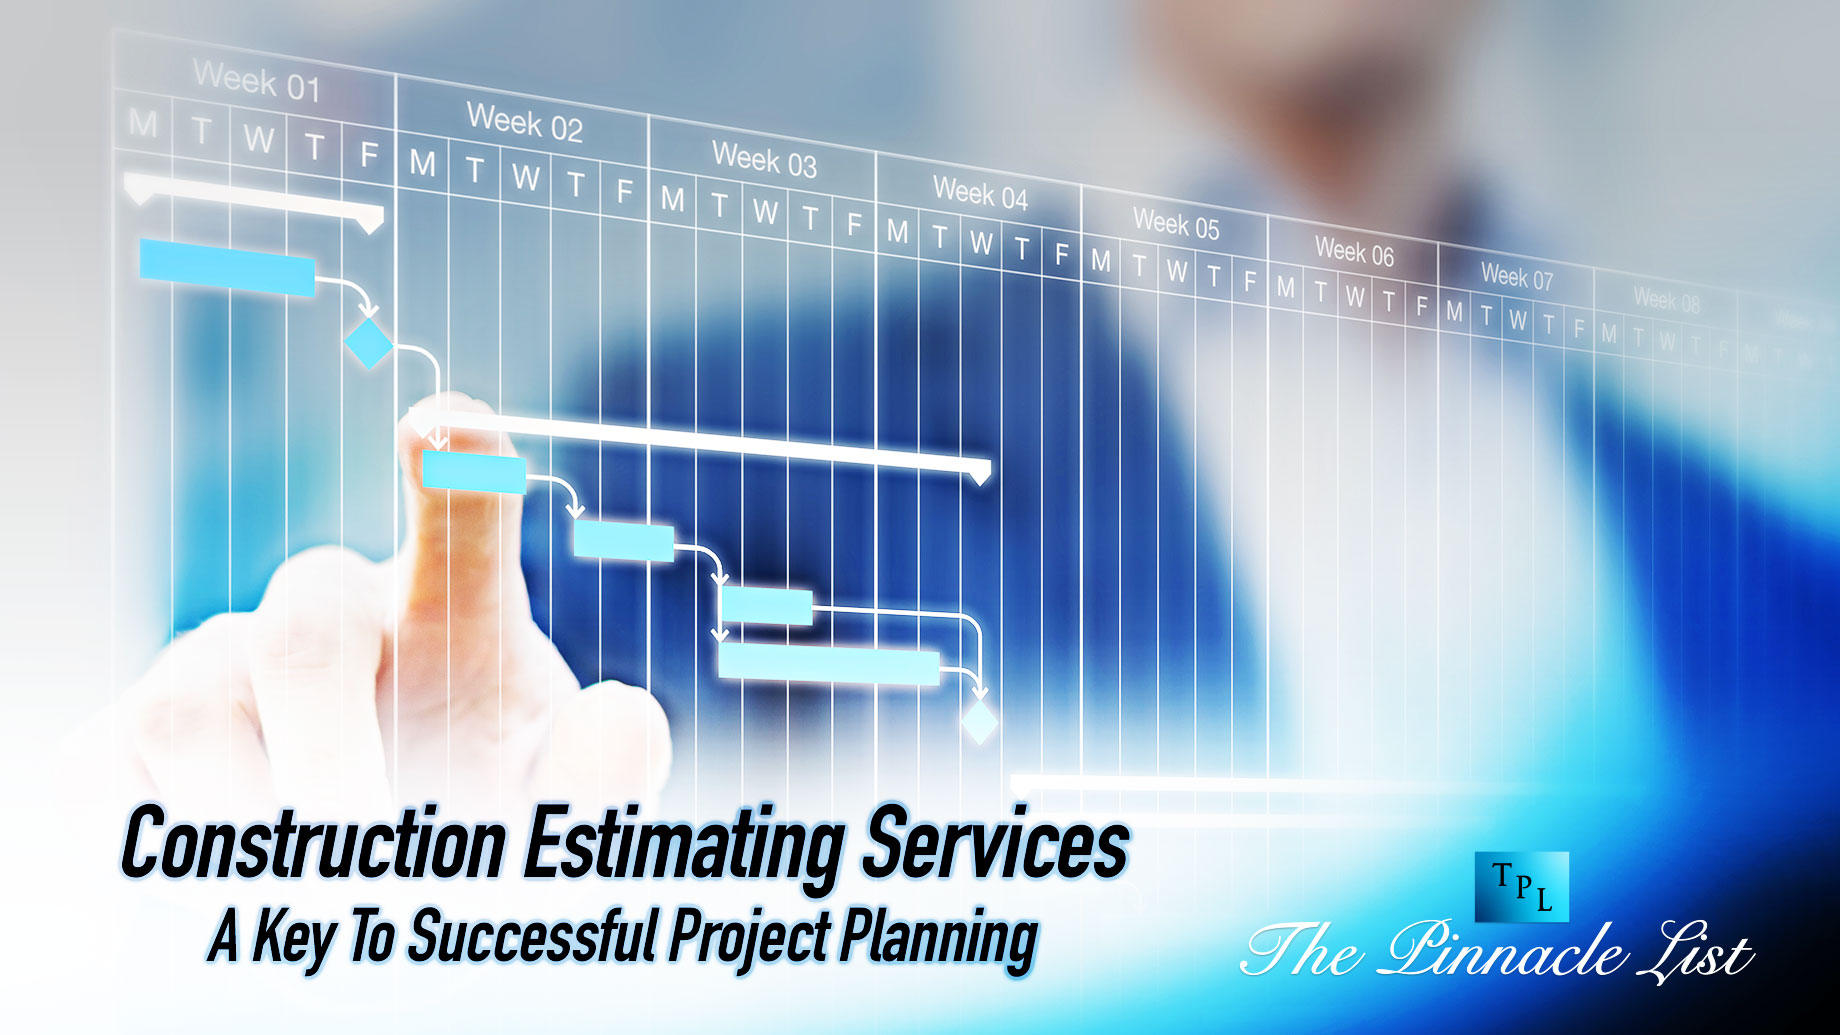 Construction Estimating Services: A Key To Successful Project Planning